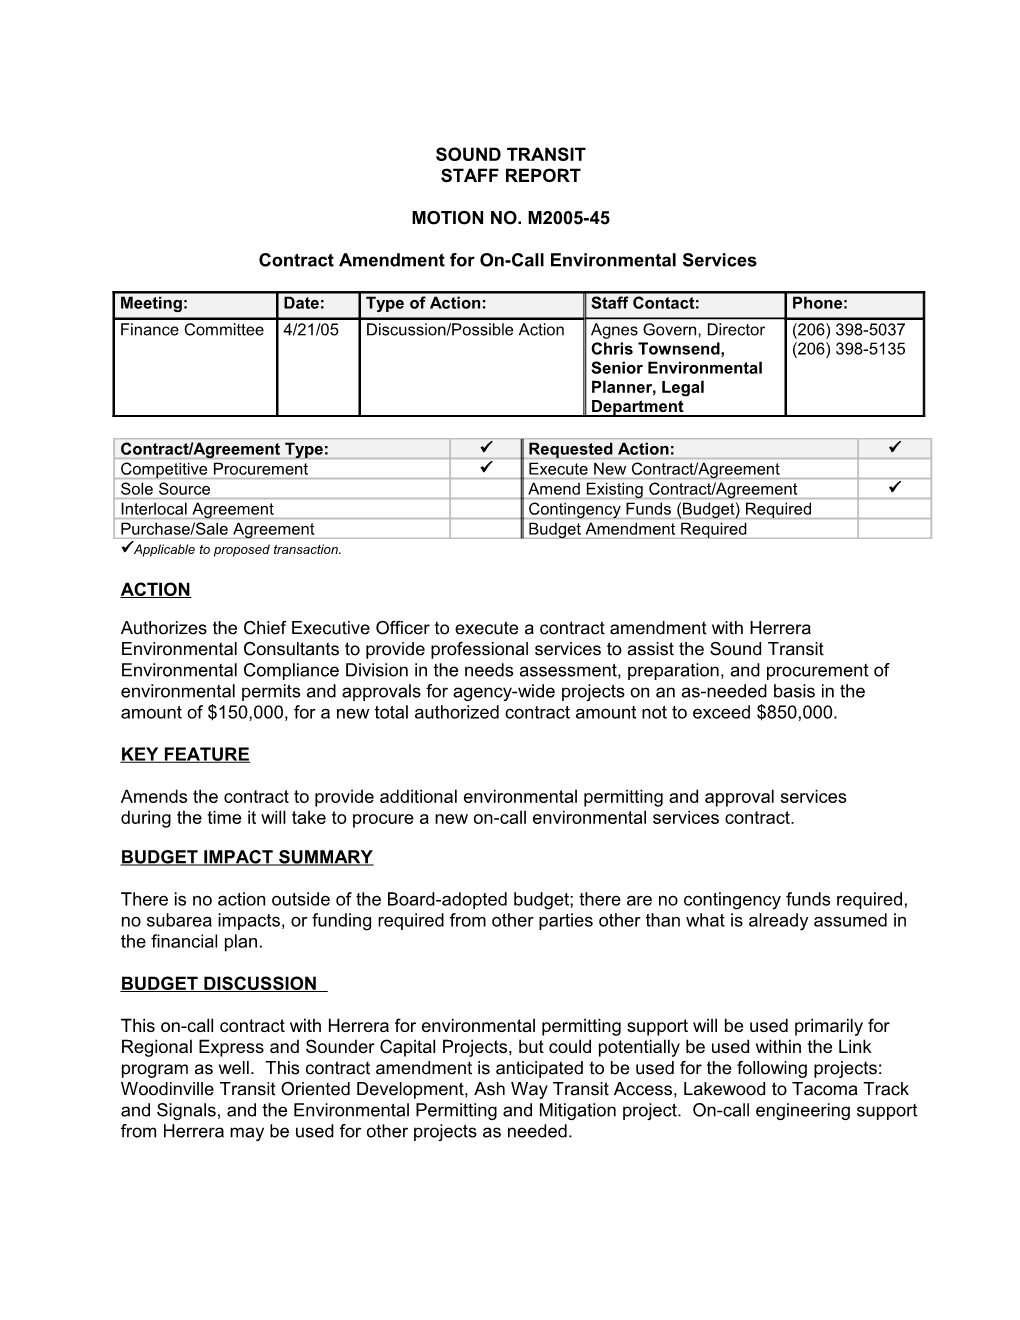 Contract Amendment for On-Call Environmental Services